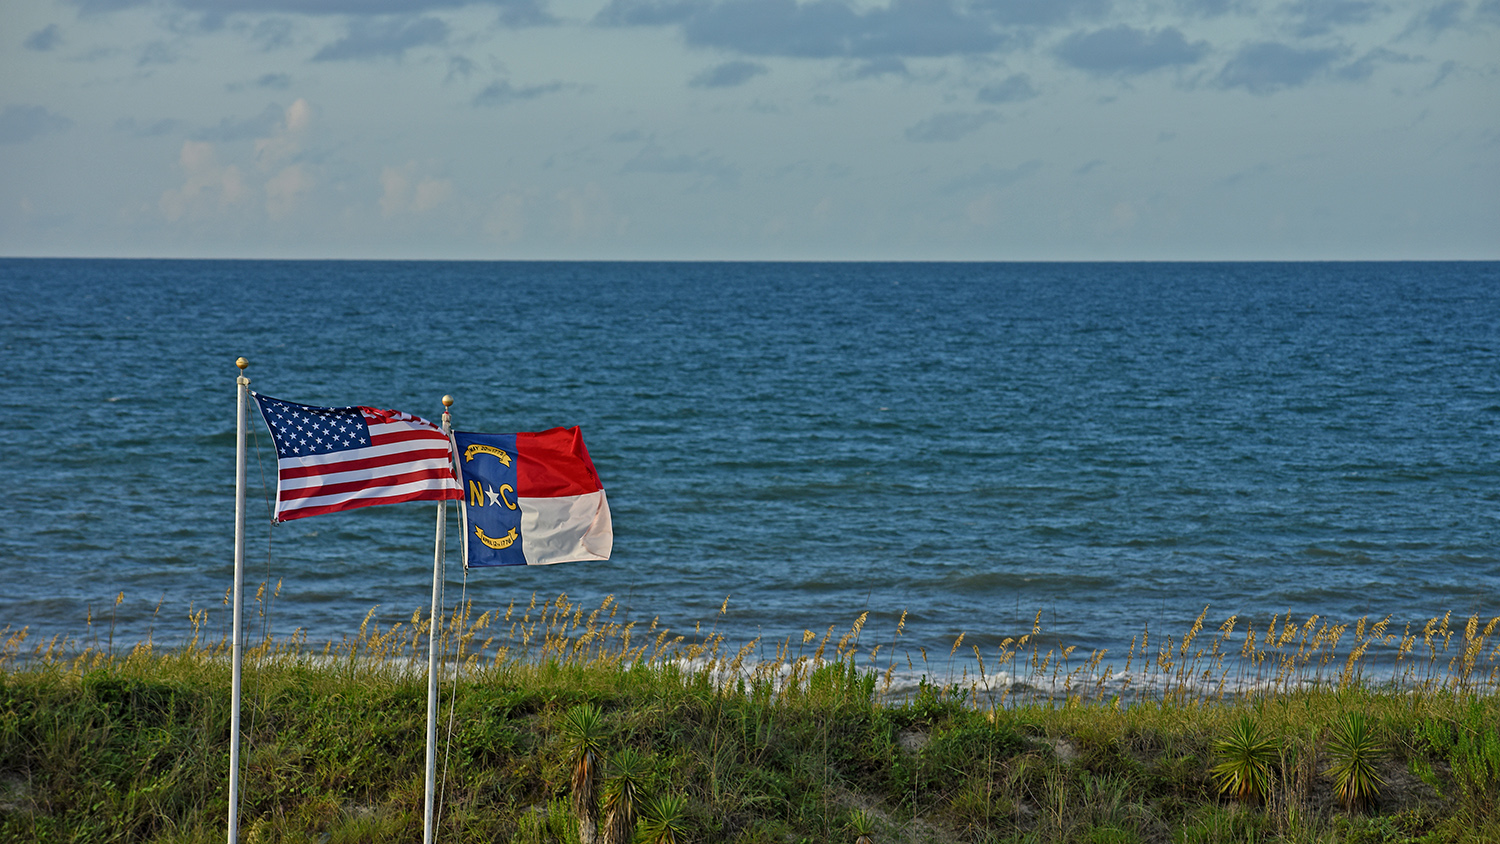 US and NC flags flap in the summer breeze along the dunes of Atlantic Beach.